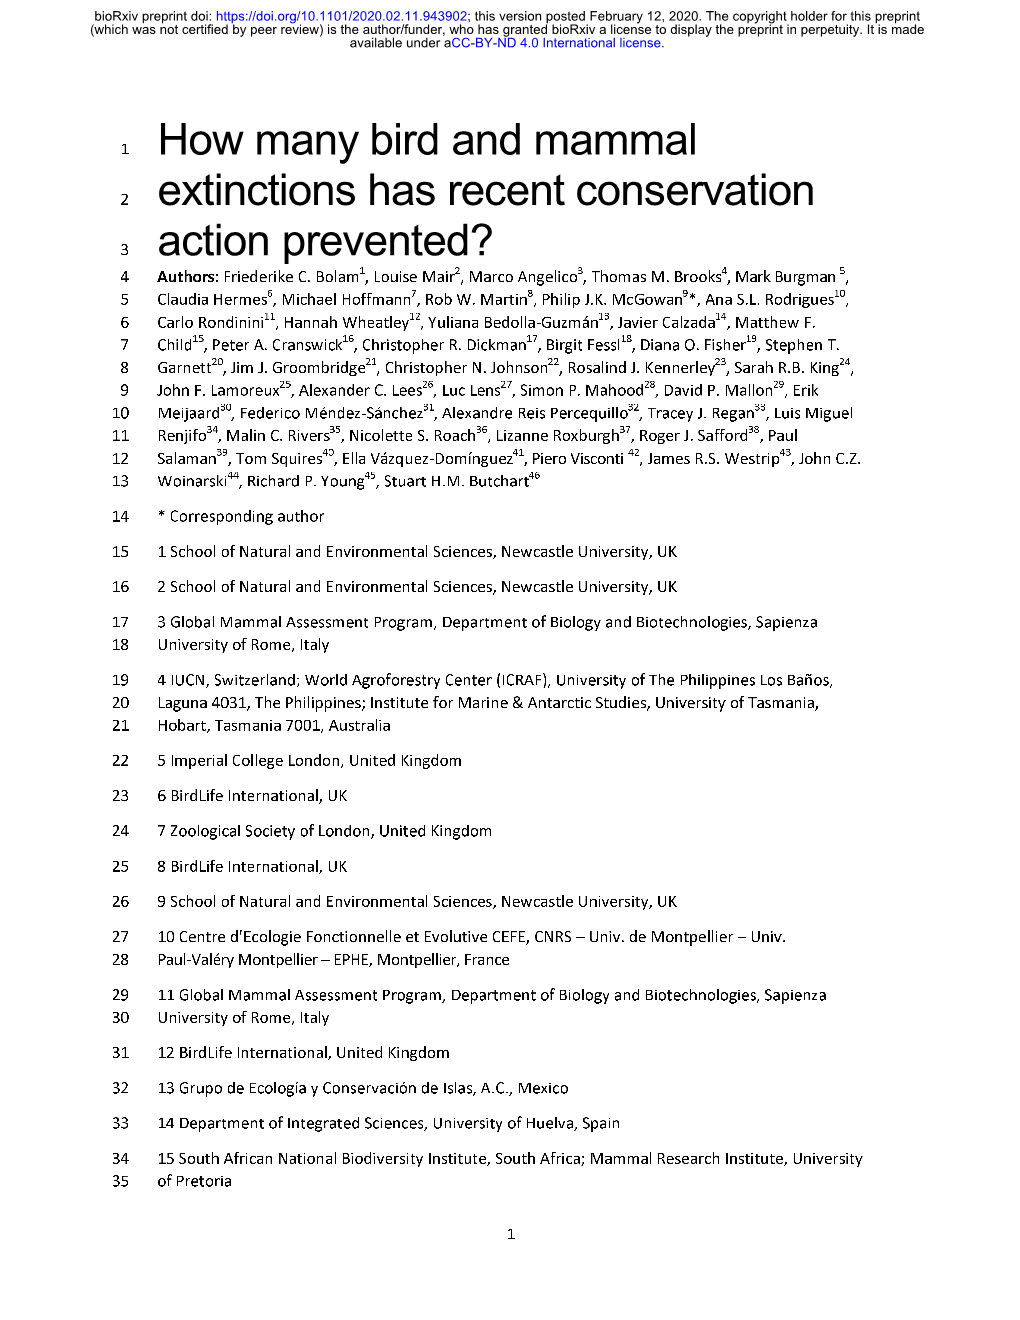 How Many Bird and Mammal Extinctions Has Recent